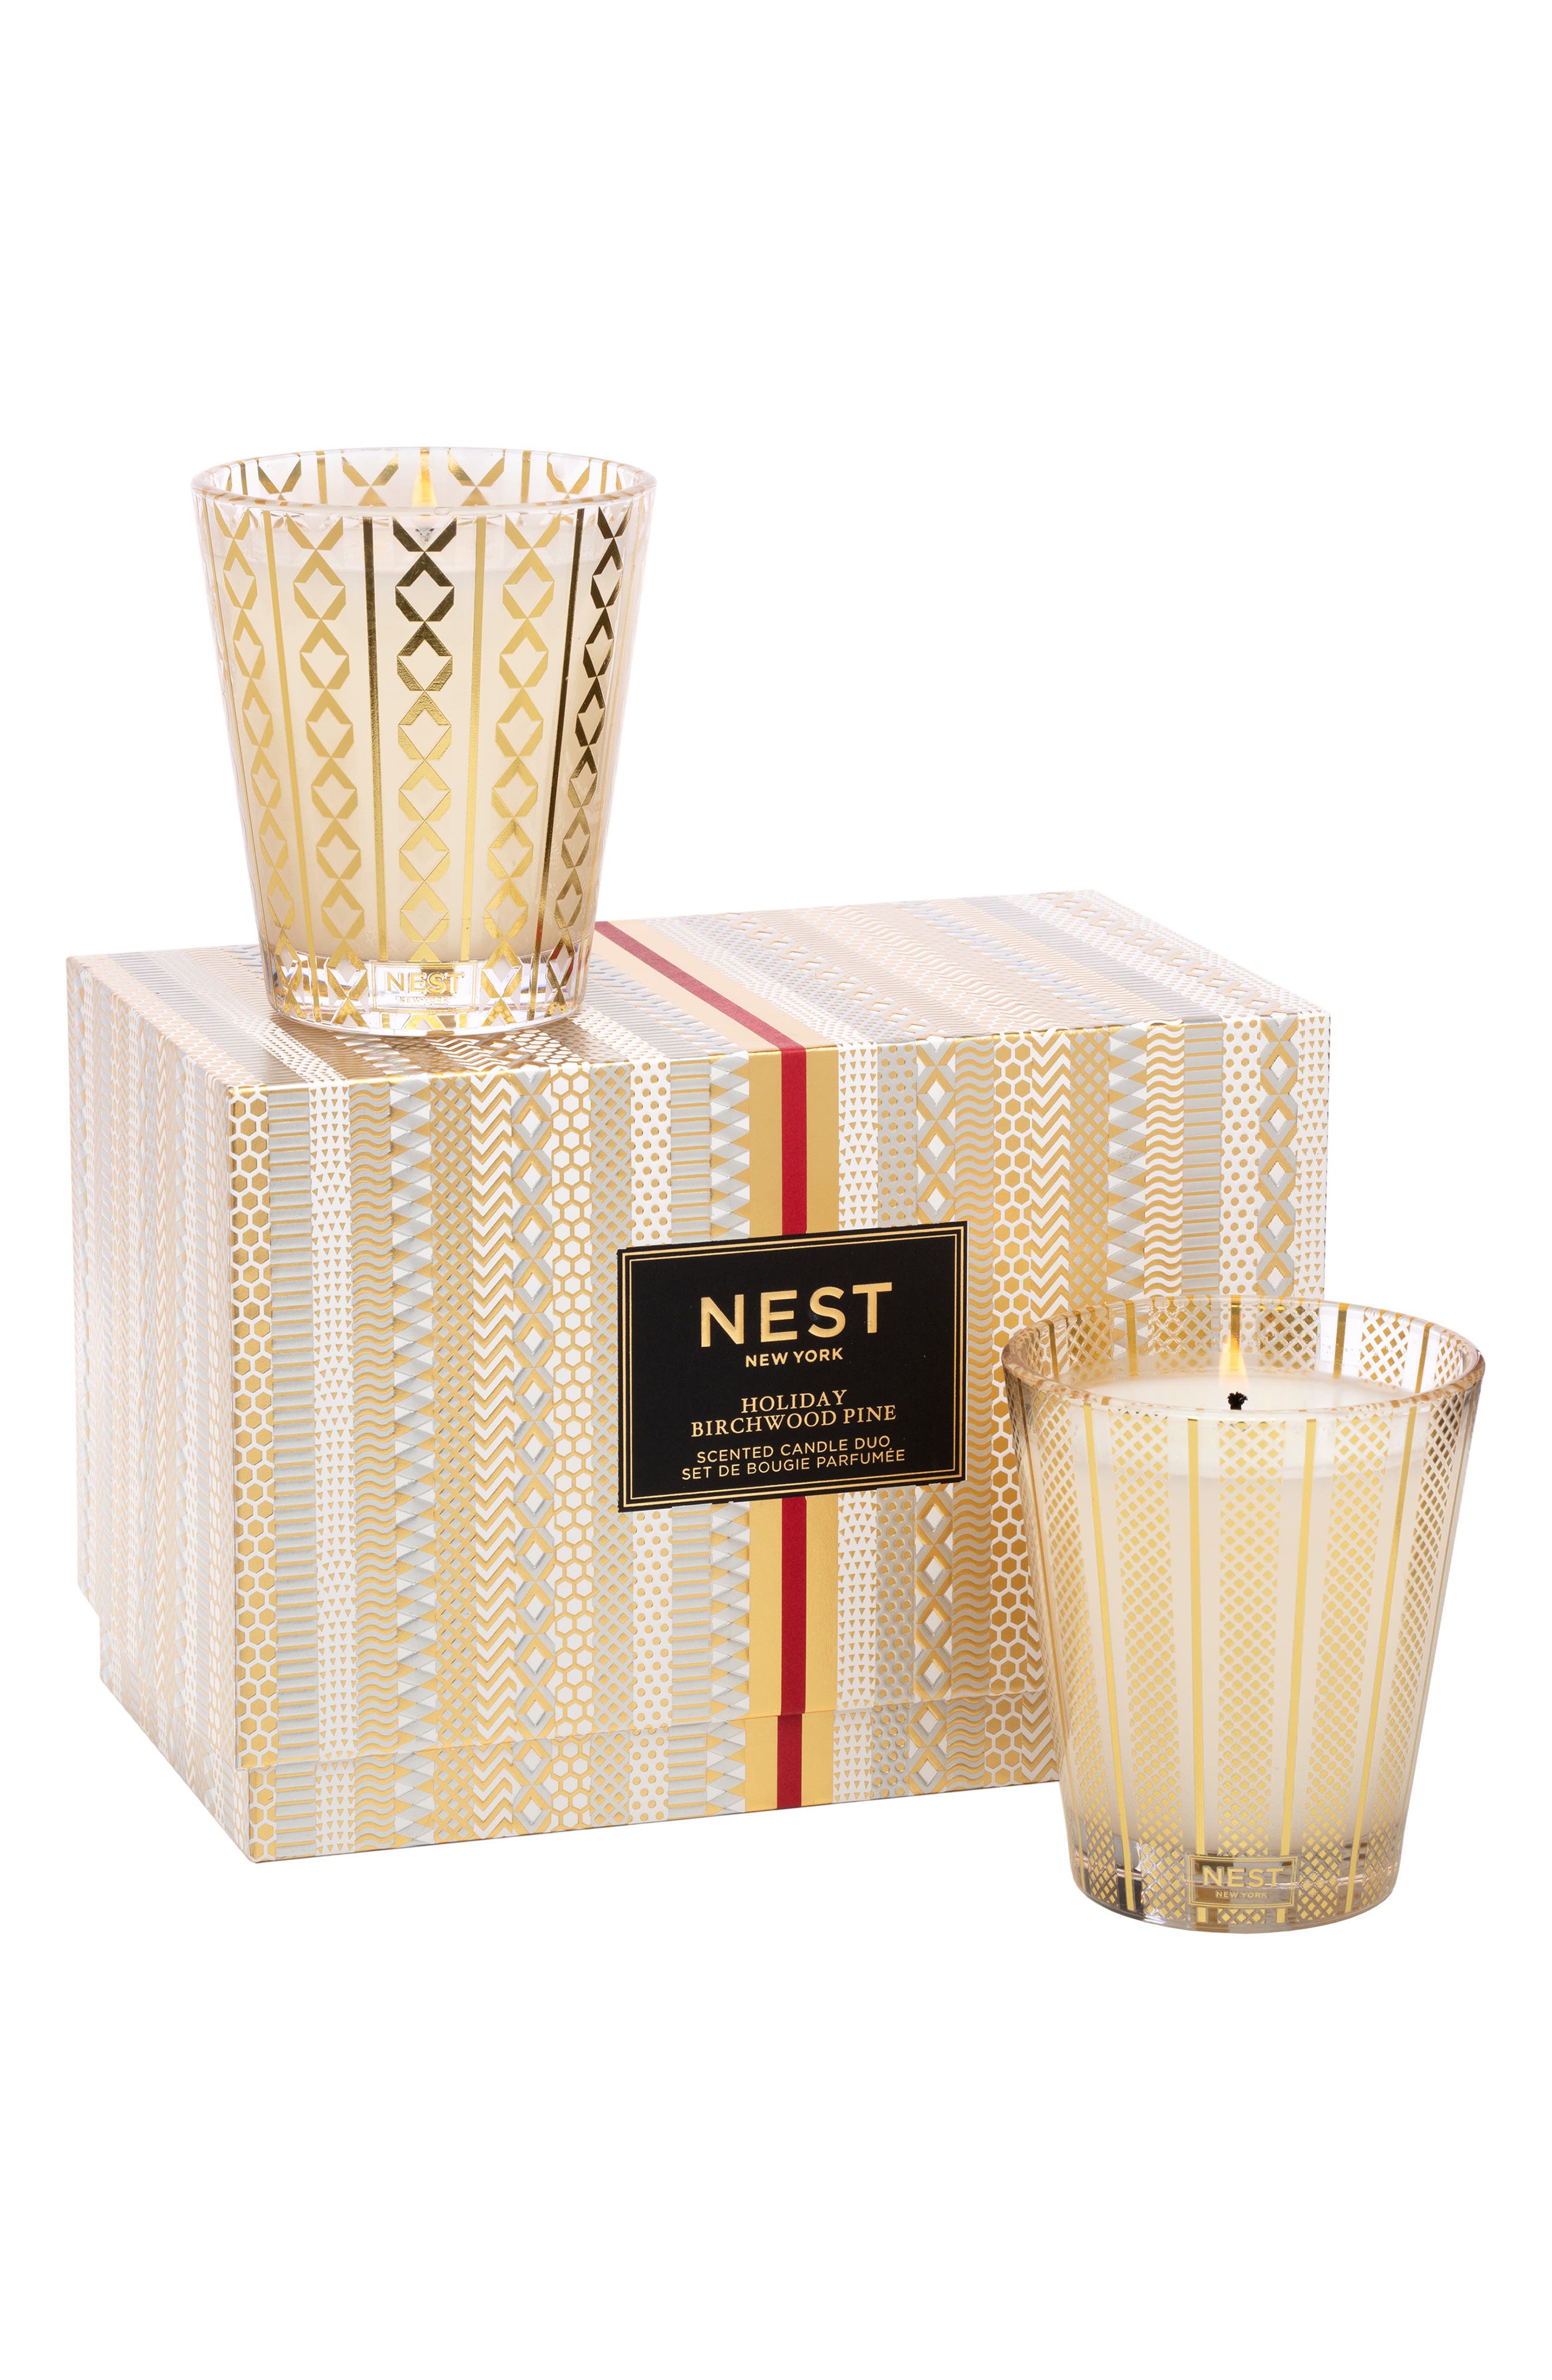 Birchwood Pine Classic Candle design by Nest Fragrances 